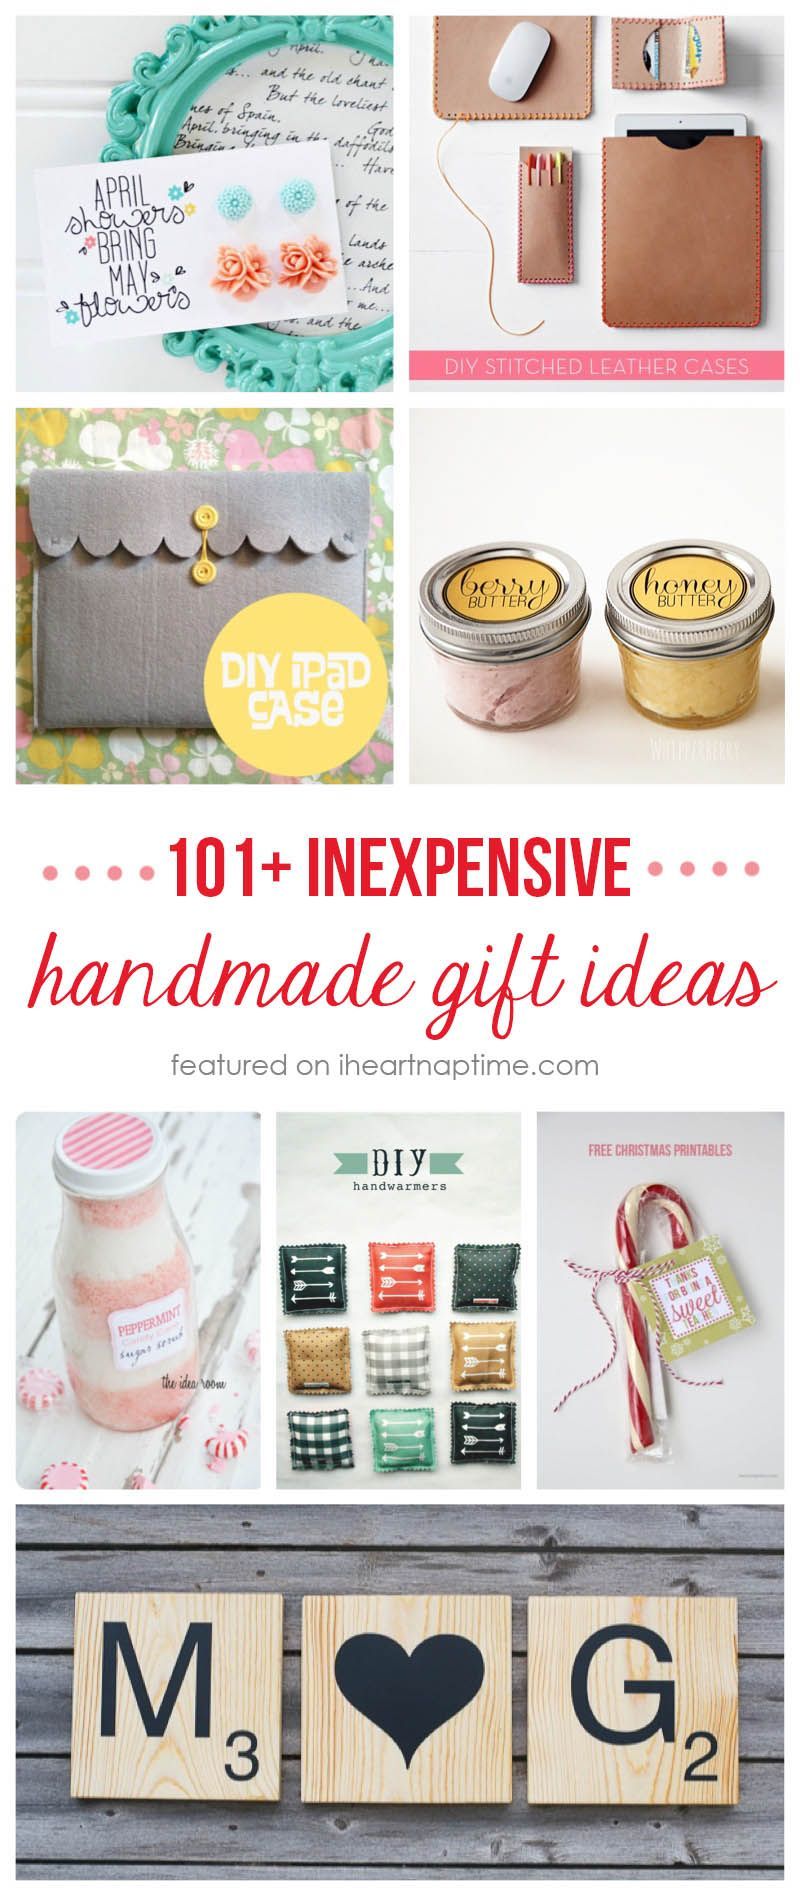 101+ inexpensive handmade Christmas gifts …so many great ideas that would be easy to make!